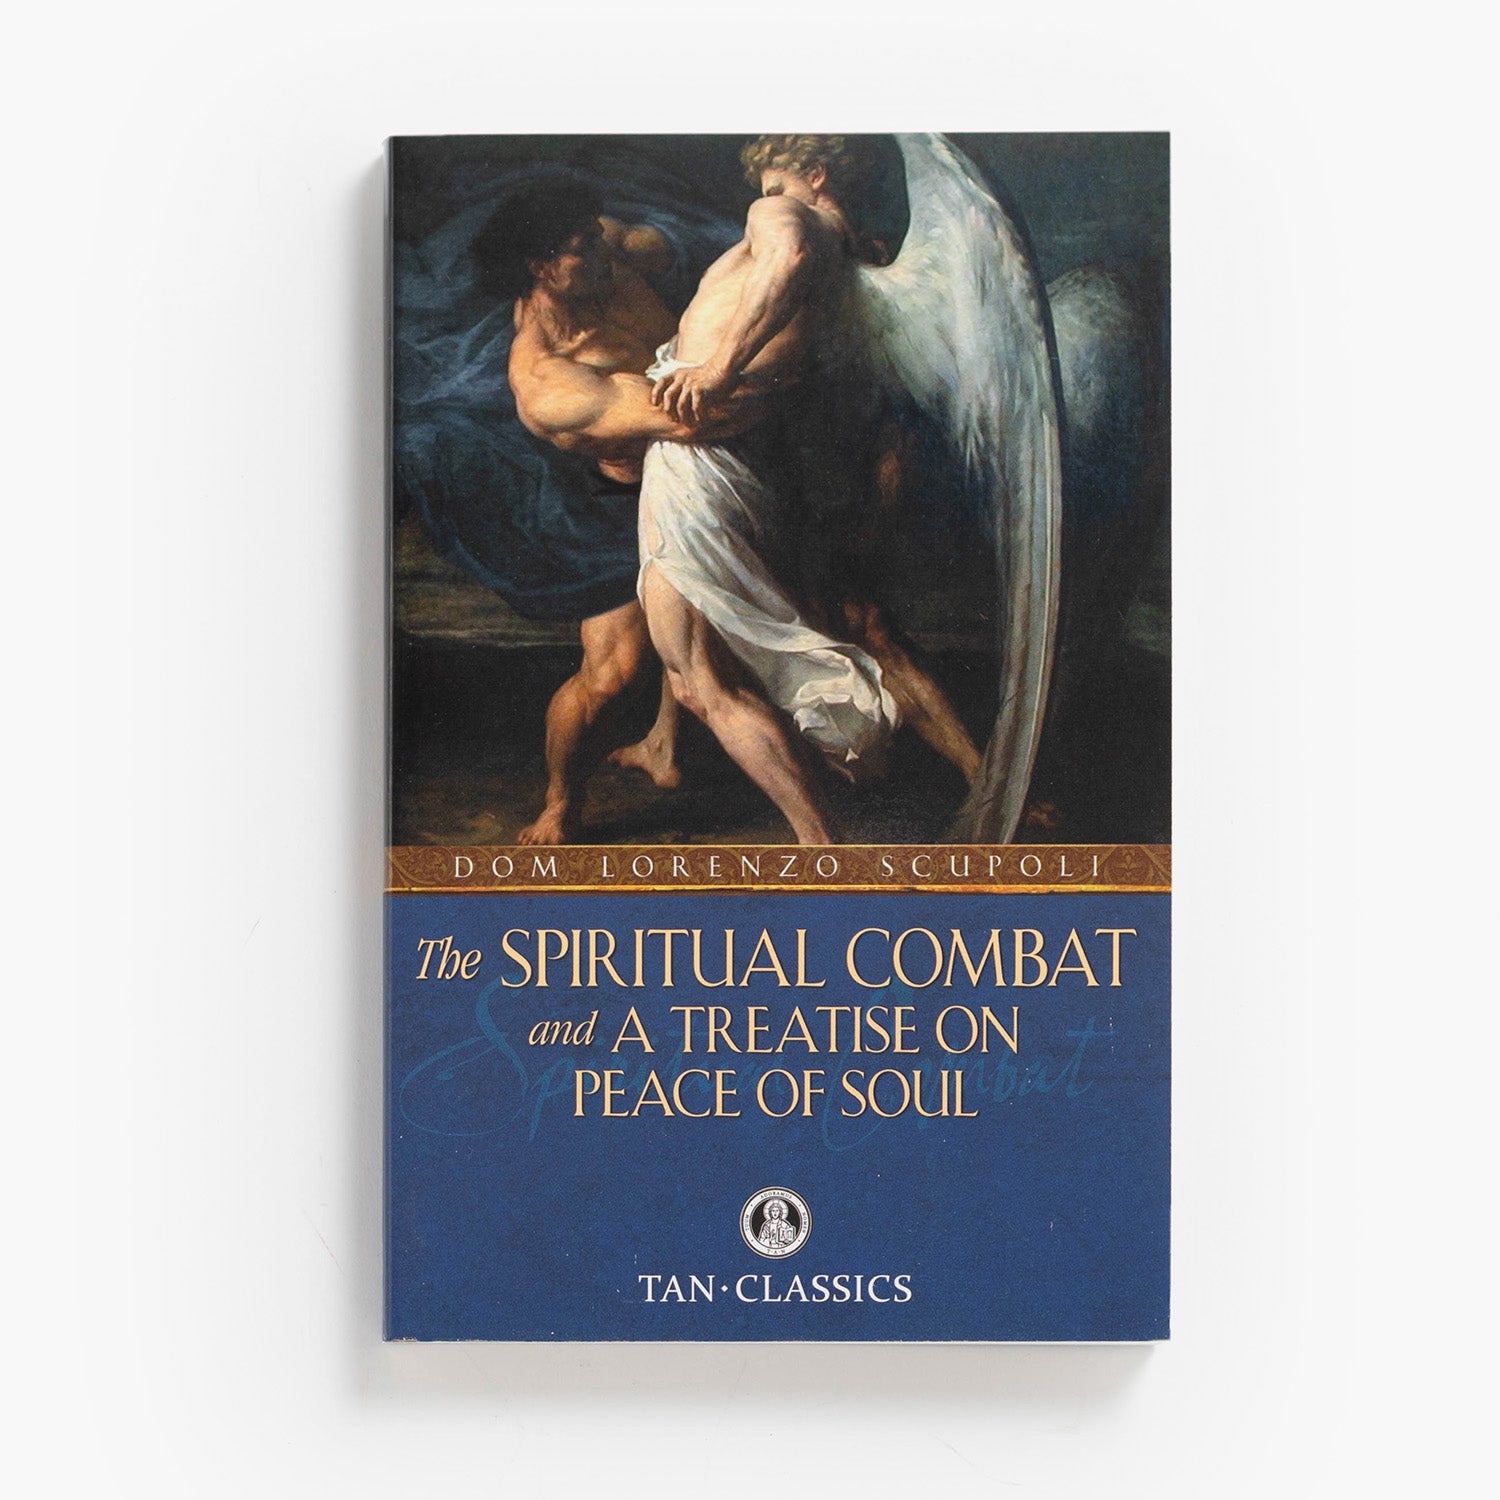 The Spiritual Combat and a Treatise on Peace of Soul by Dom Lorenzo Scupoli